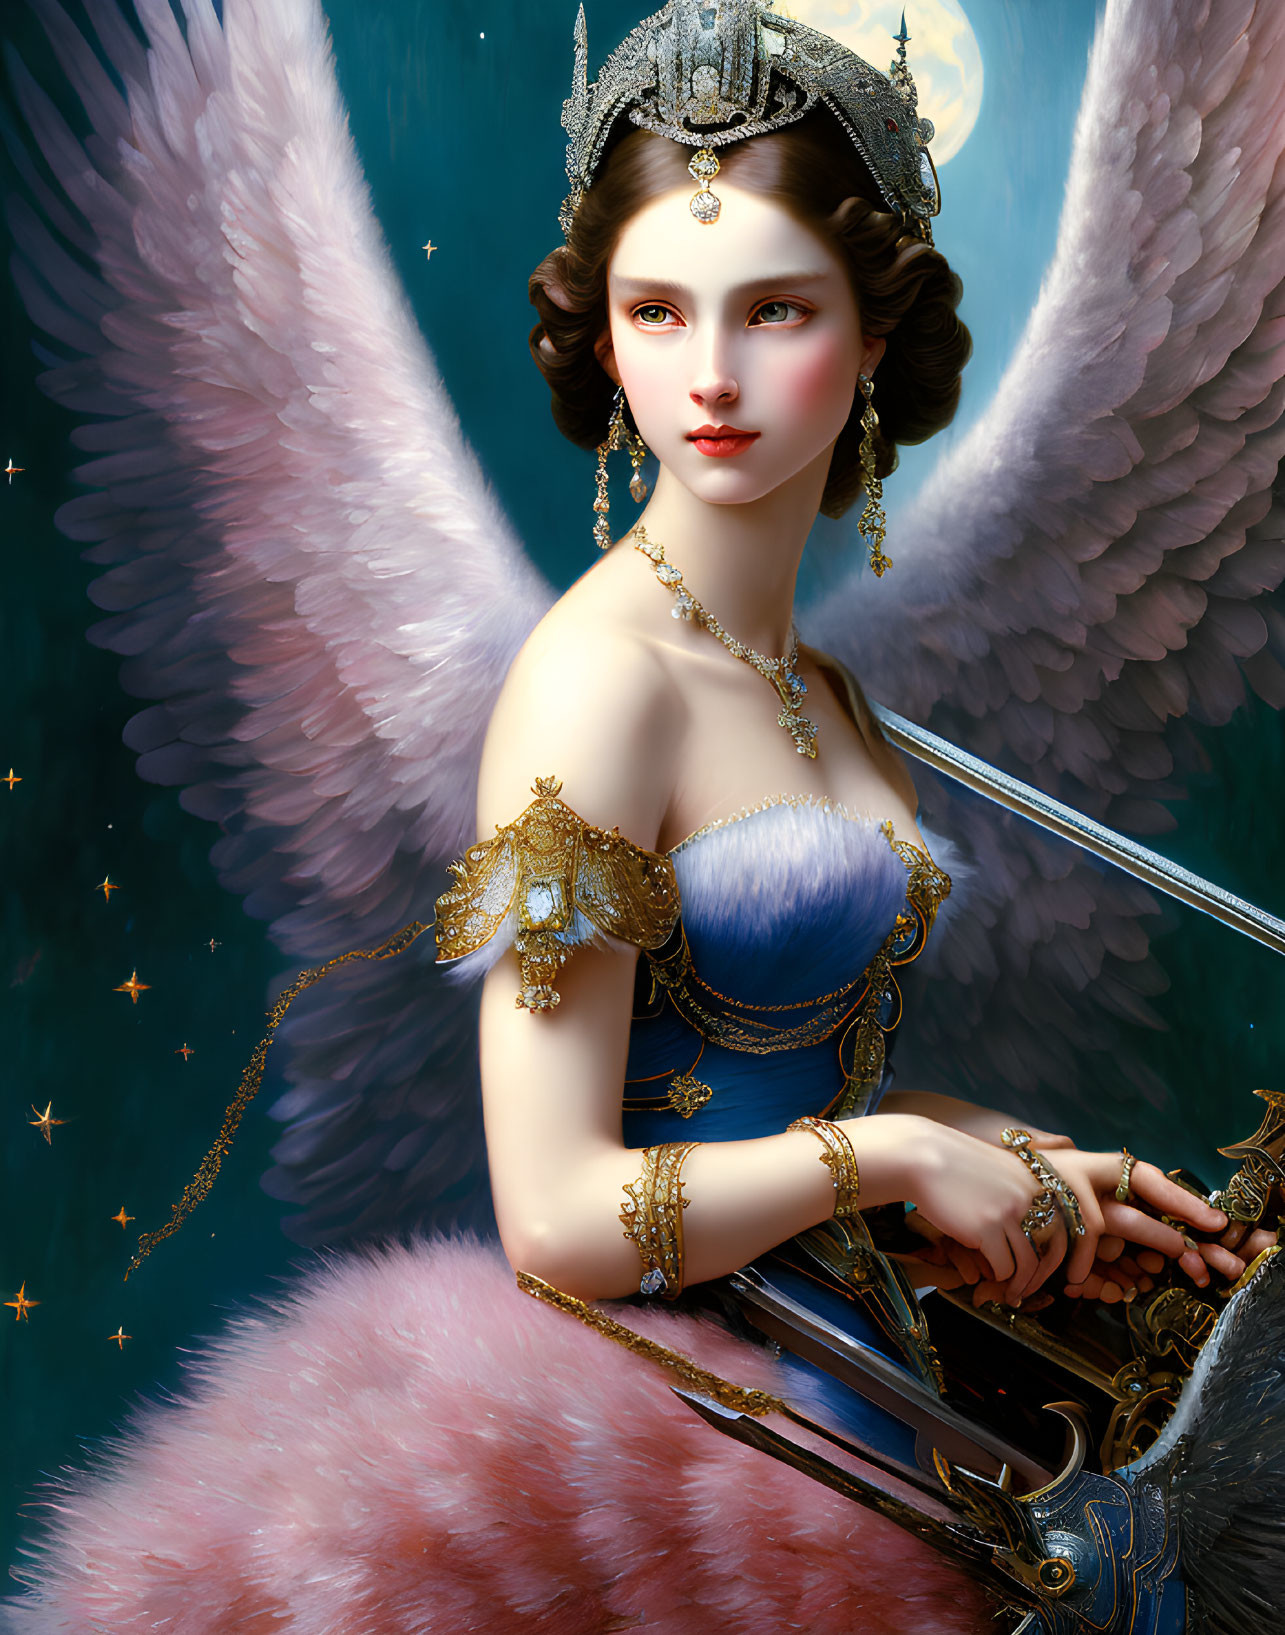 Illustration of female figure with white wings, blue dress, gold armor, sword, starry backdrop